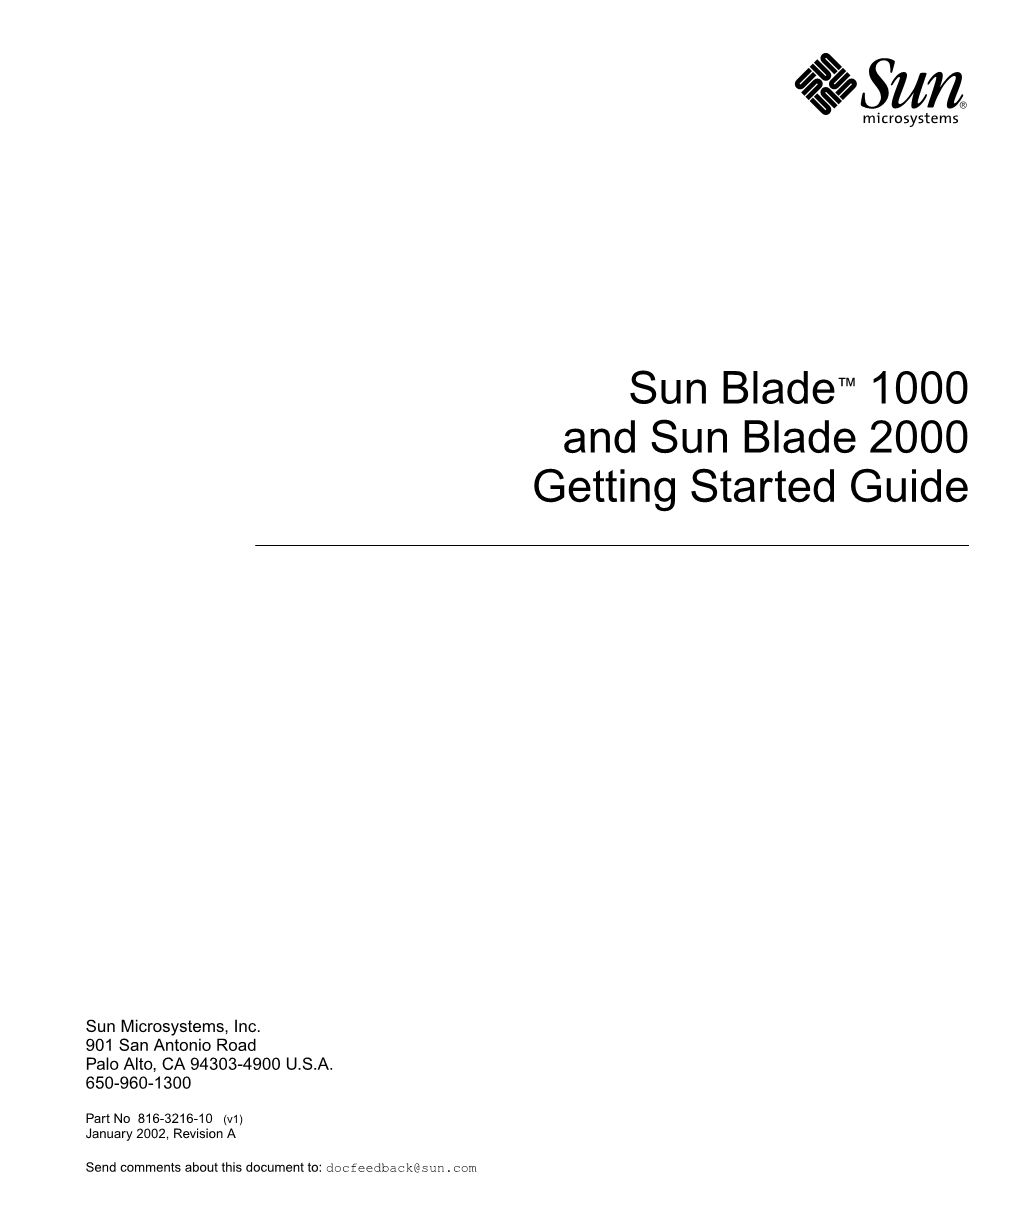 Sun Blade 1000 and Sun Blade 2000 Getting Started Guide